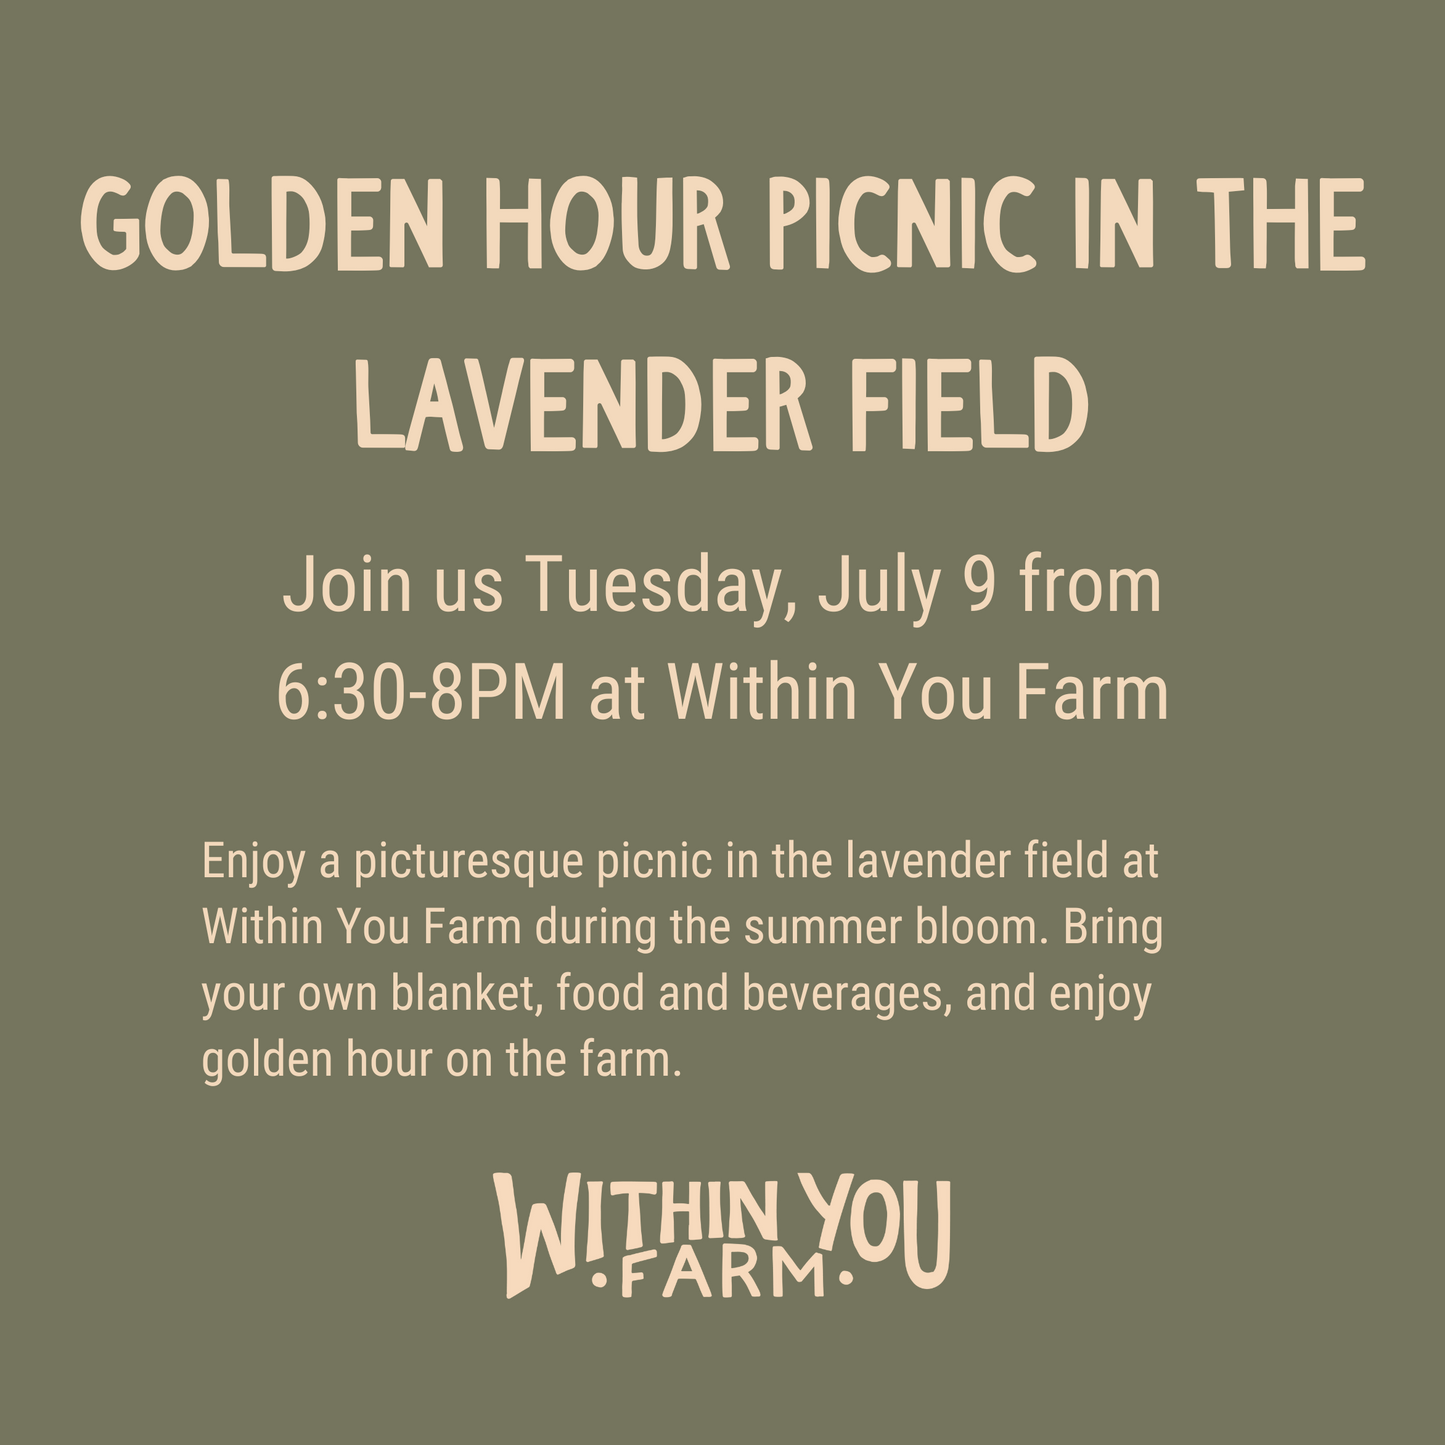 Golden Hour Picnic in the Lavender Field (7/9)